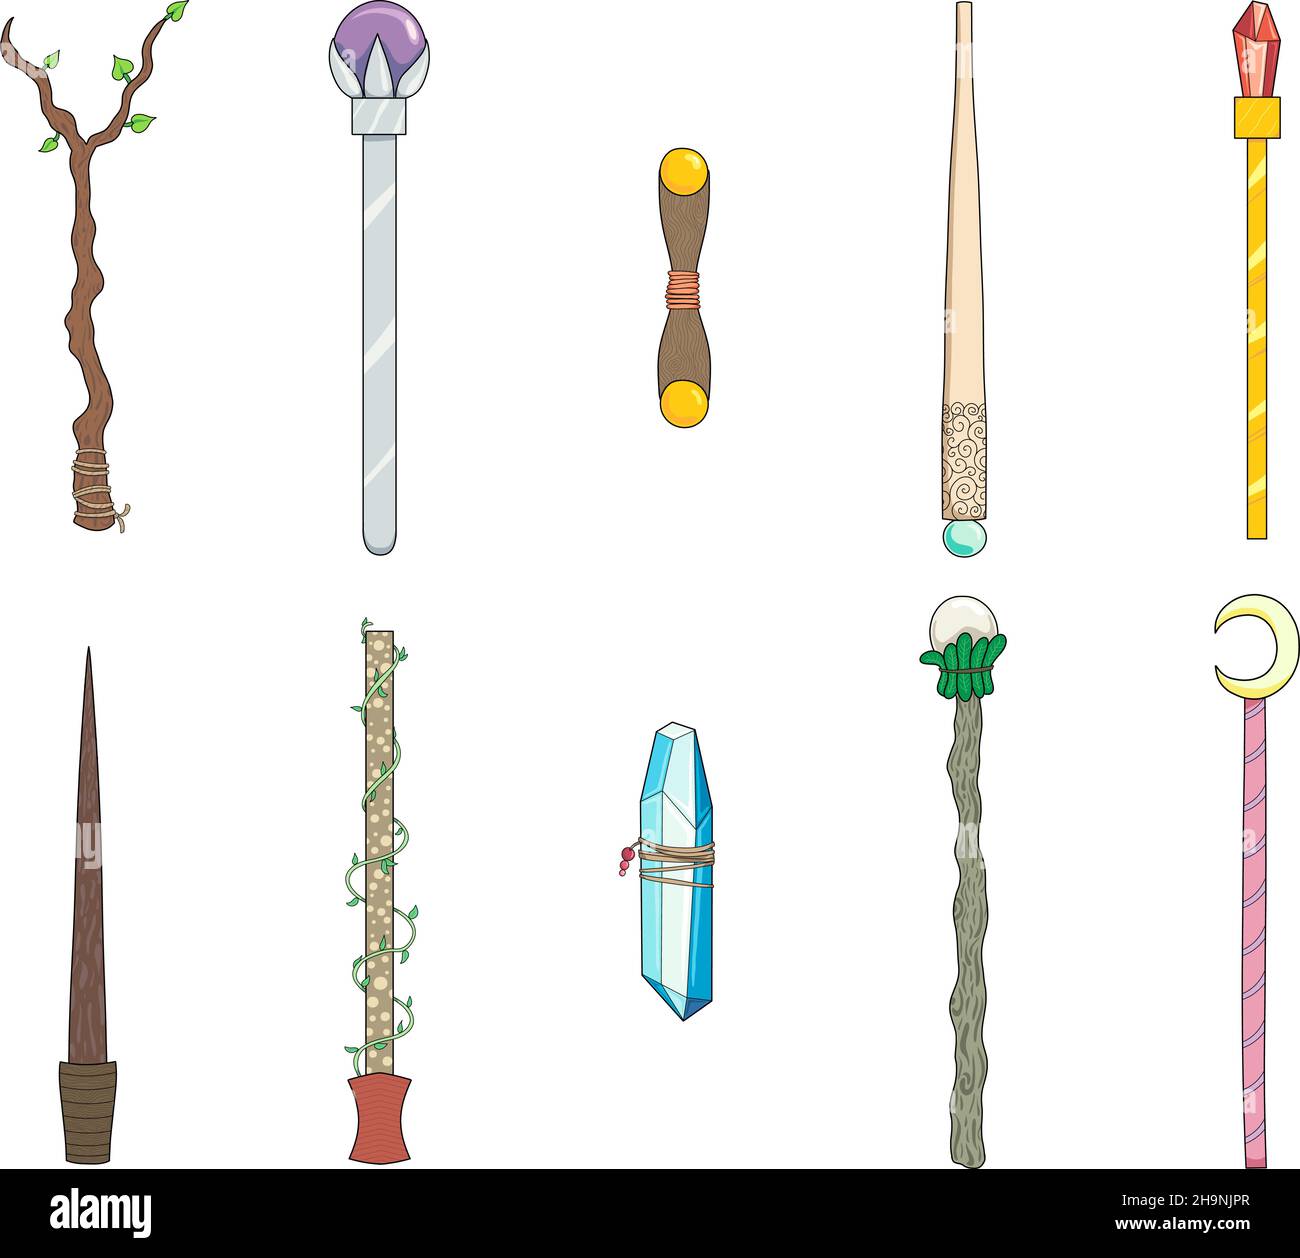 Hand drawn color vector illustration of collection of magic wands made of wood, crystal, metal, glass, and plants Stock Vector